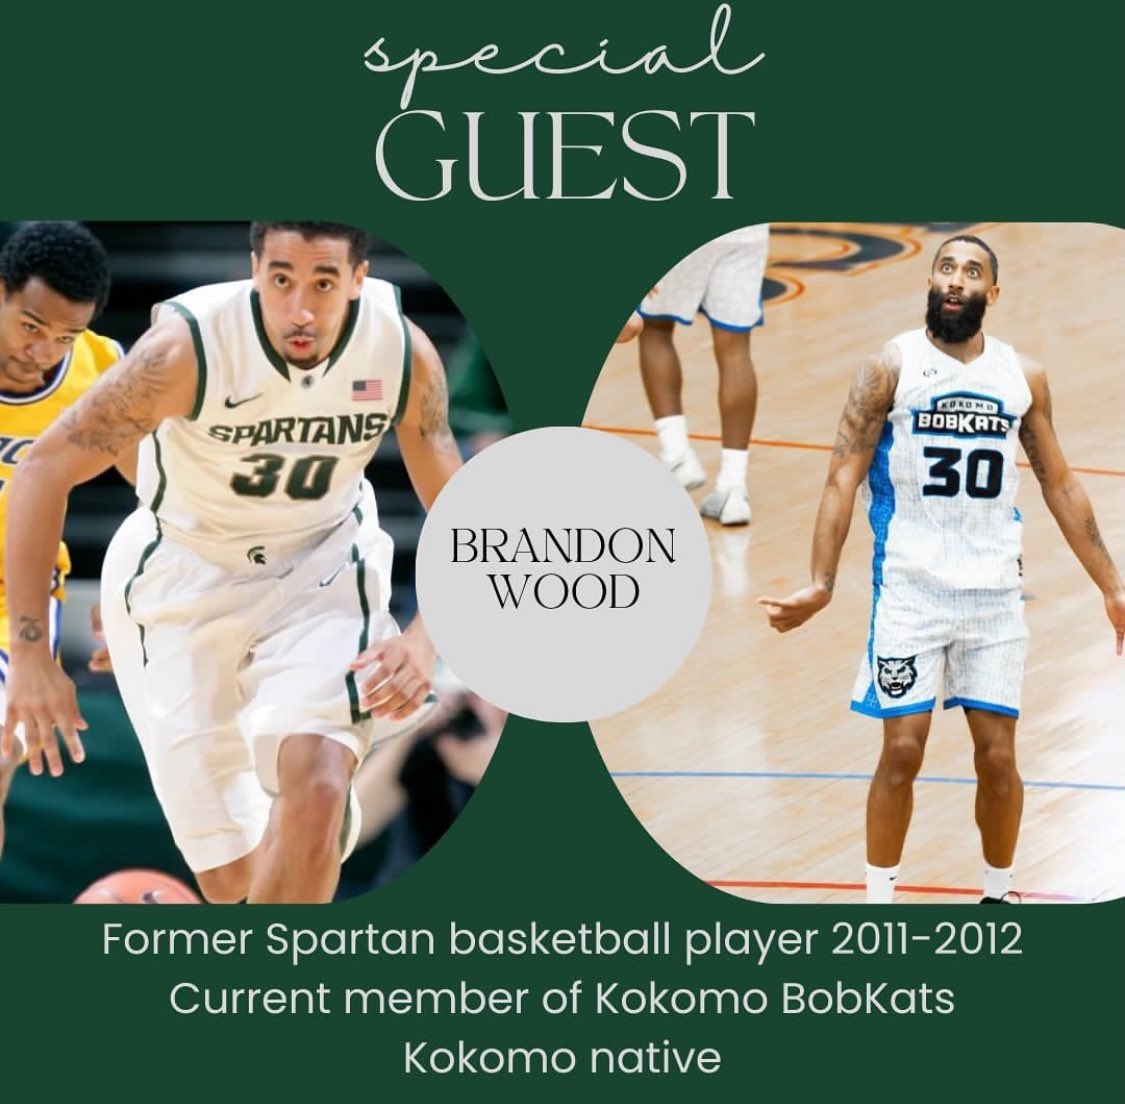 Tomorrow I’ll be at Bubba’s 33 Fishers for a meet & greet hosted by @MSUAlum_Indy! 🙌🏽 Looking forward to meeting some new Indiana based Spartans and watching us get this second round win against UNC! 💚